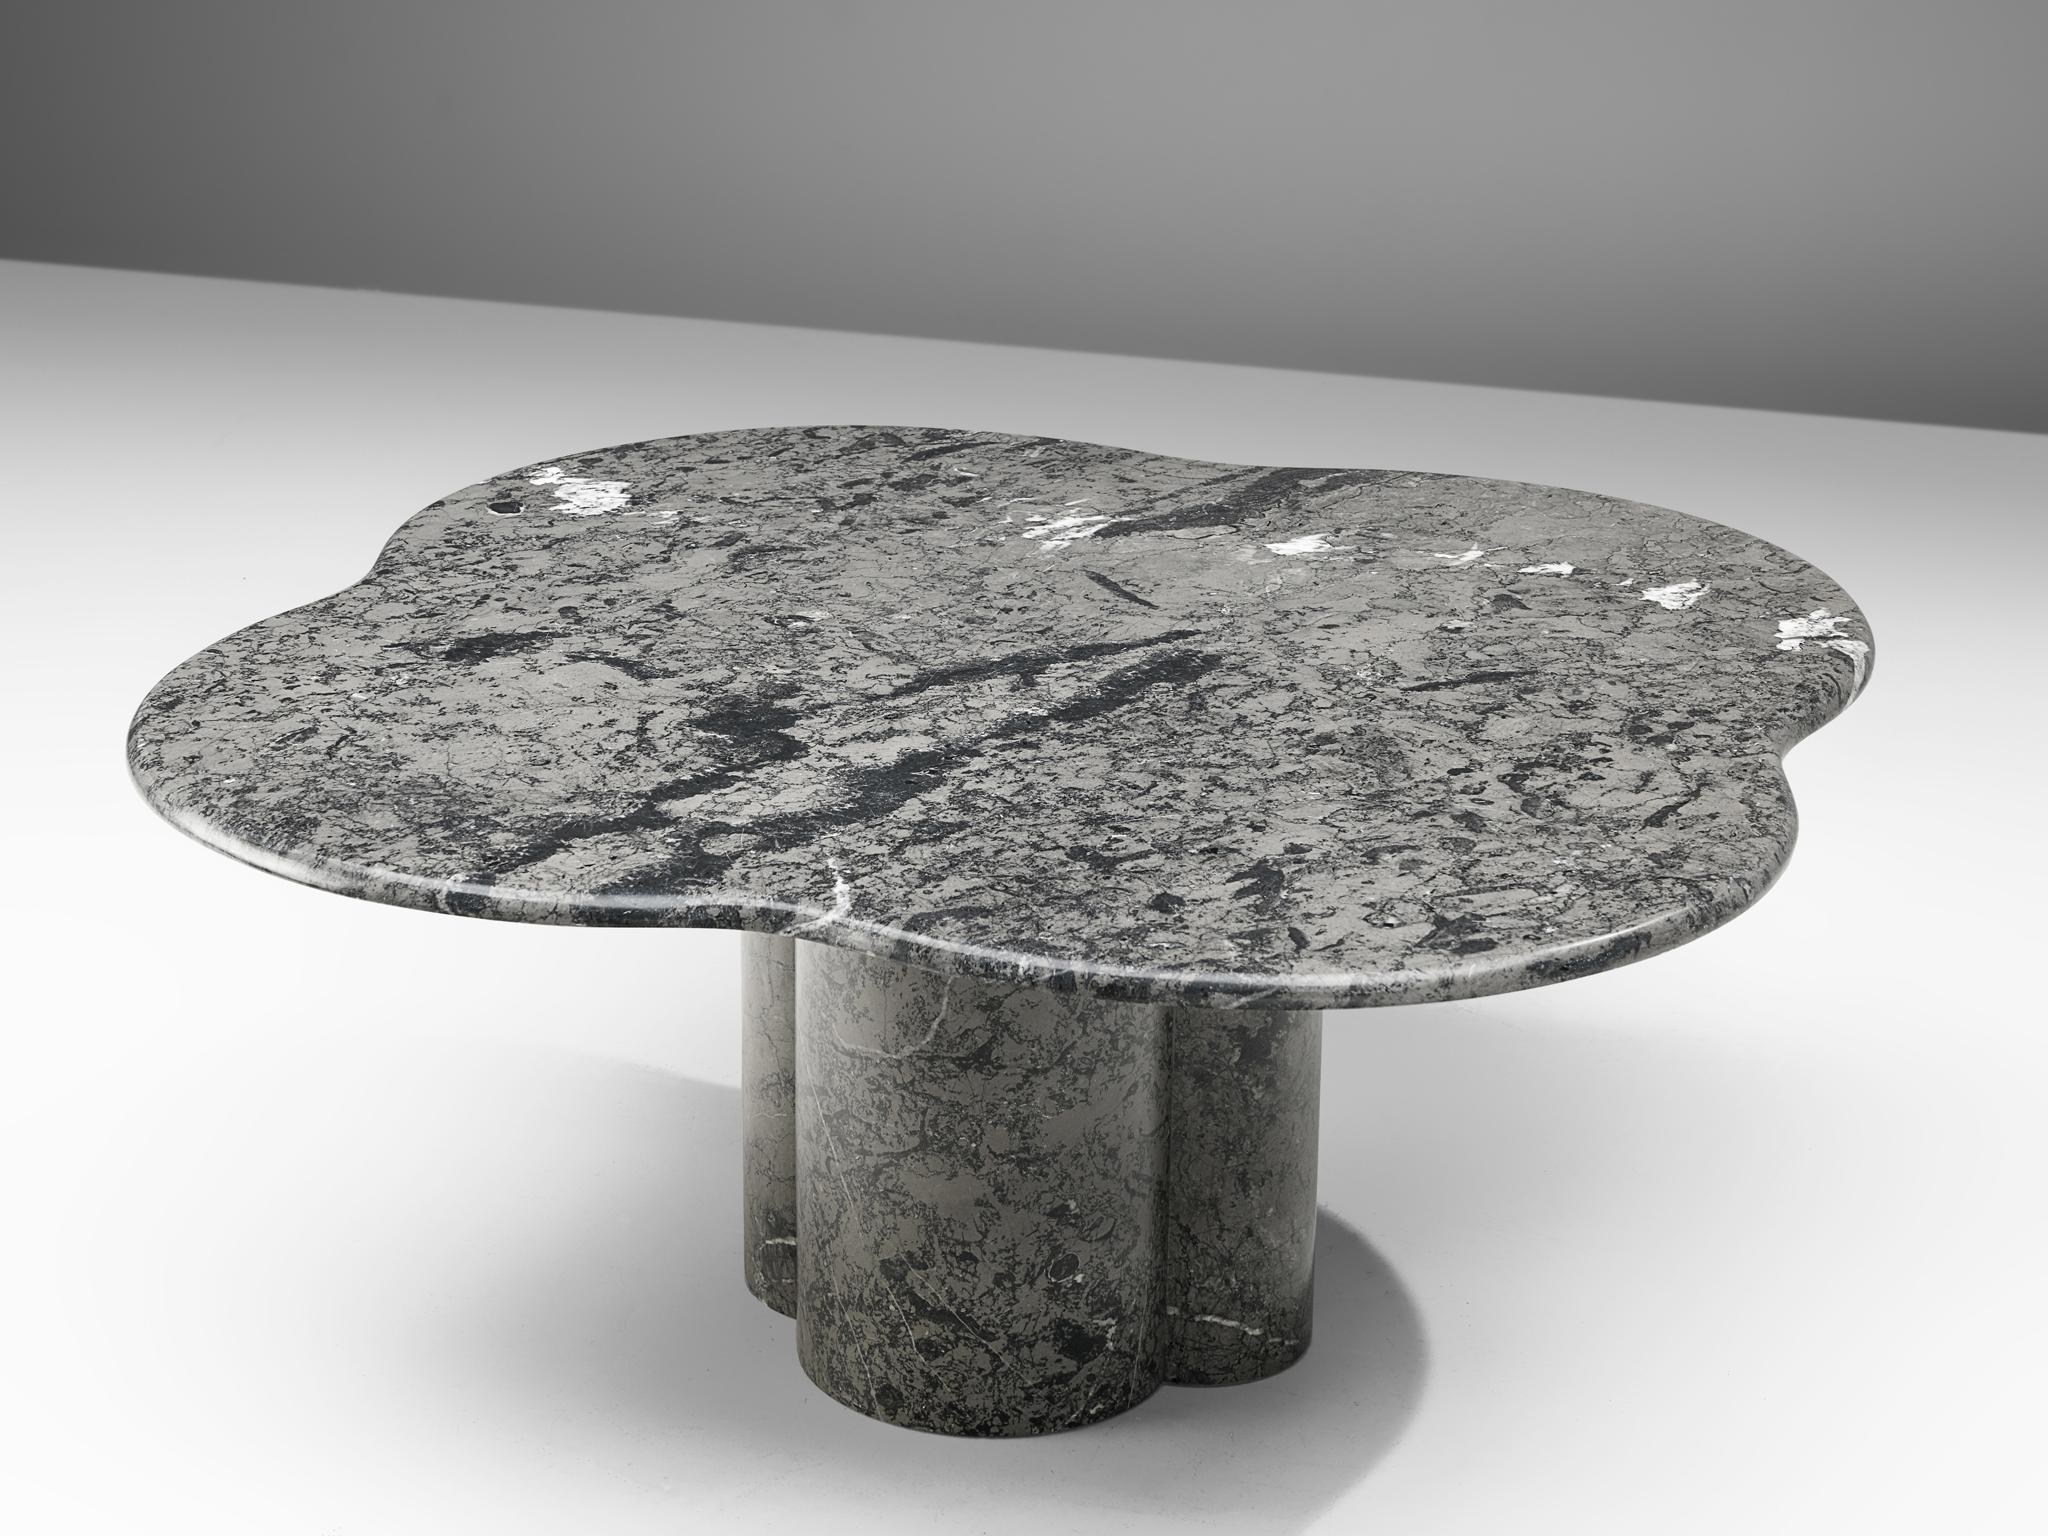 European Clover Shaped Coffee Table in Grey Marble